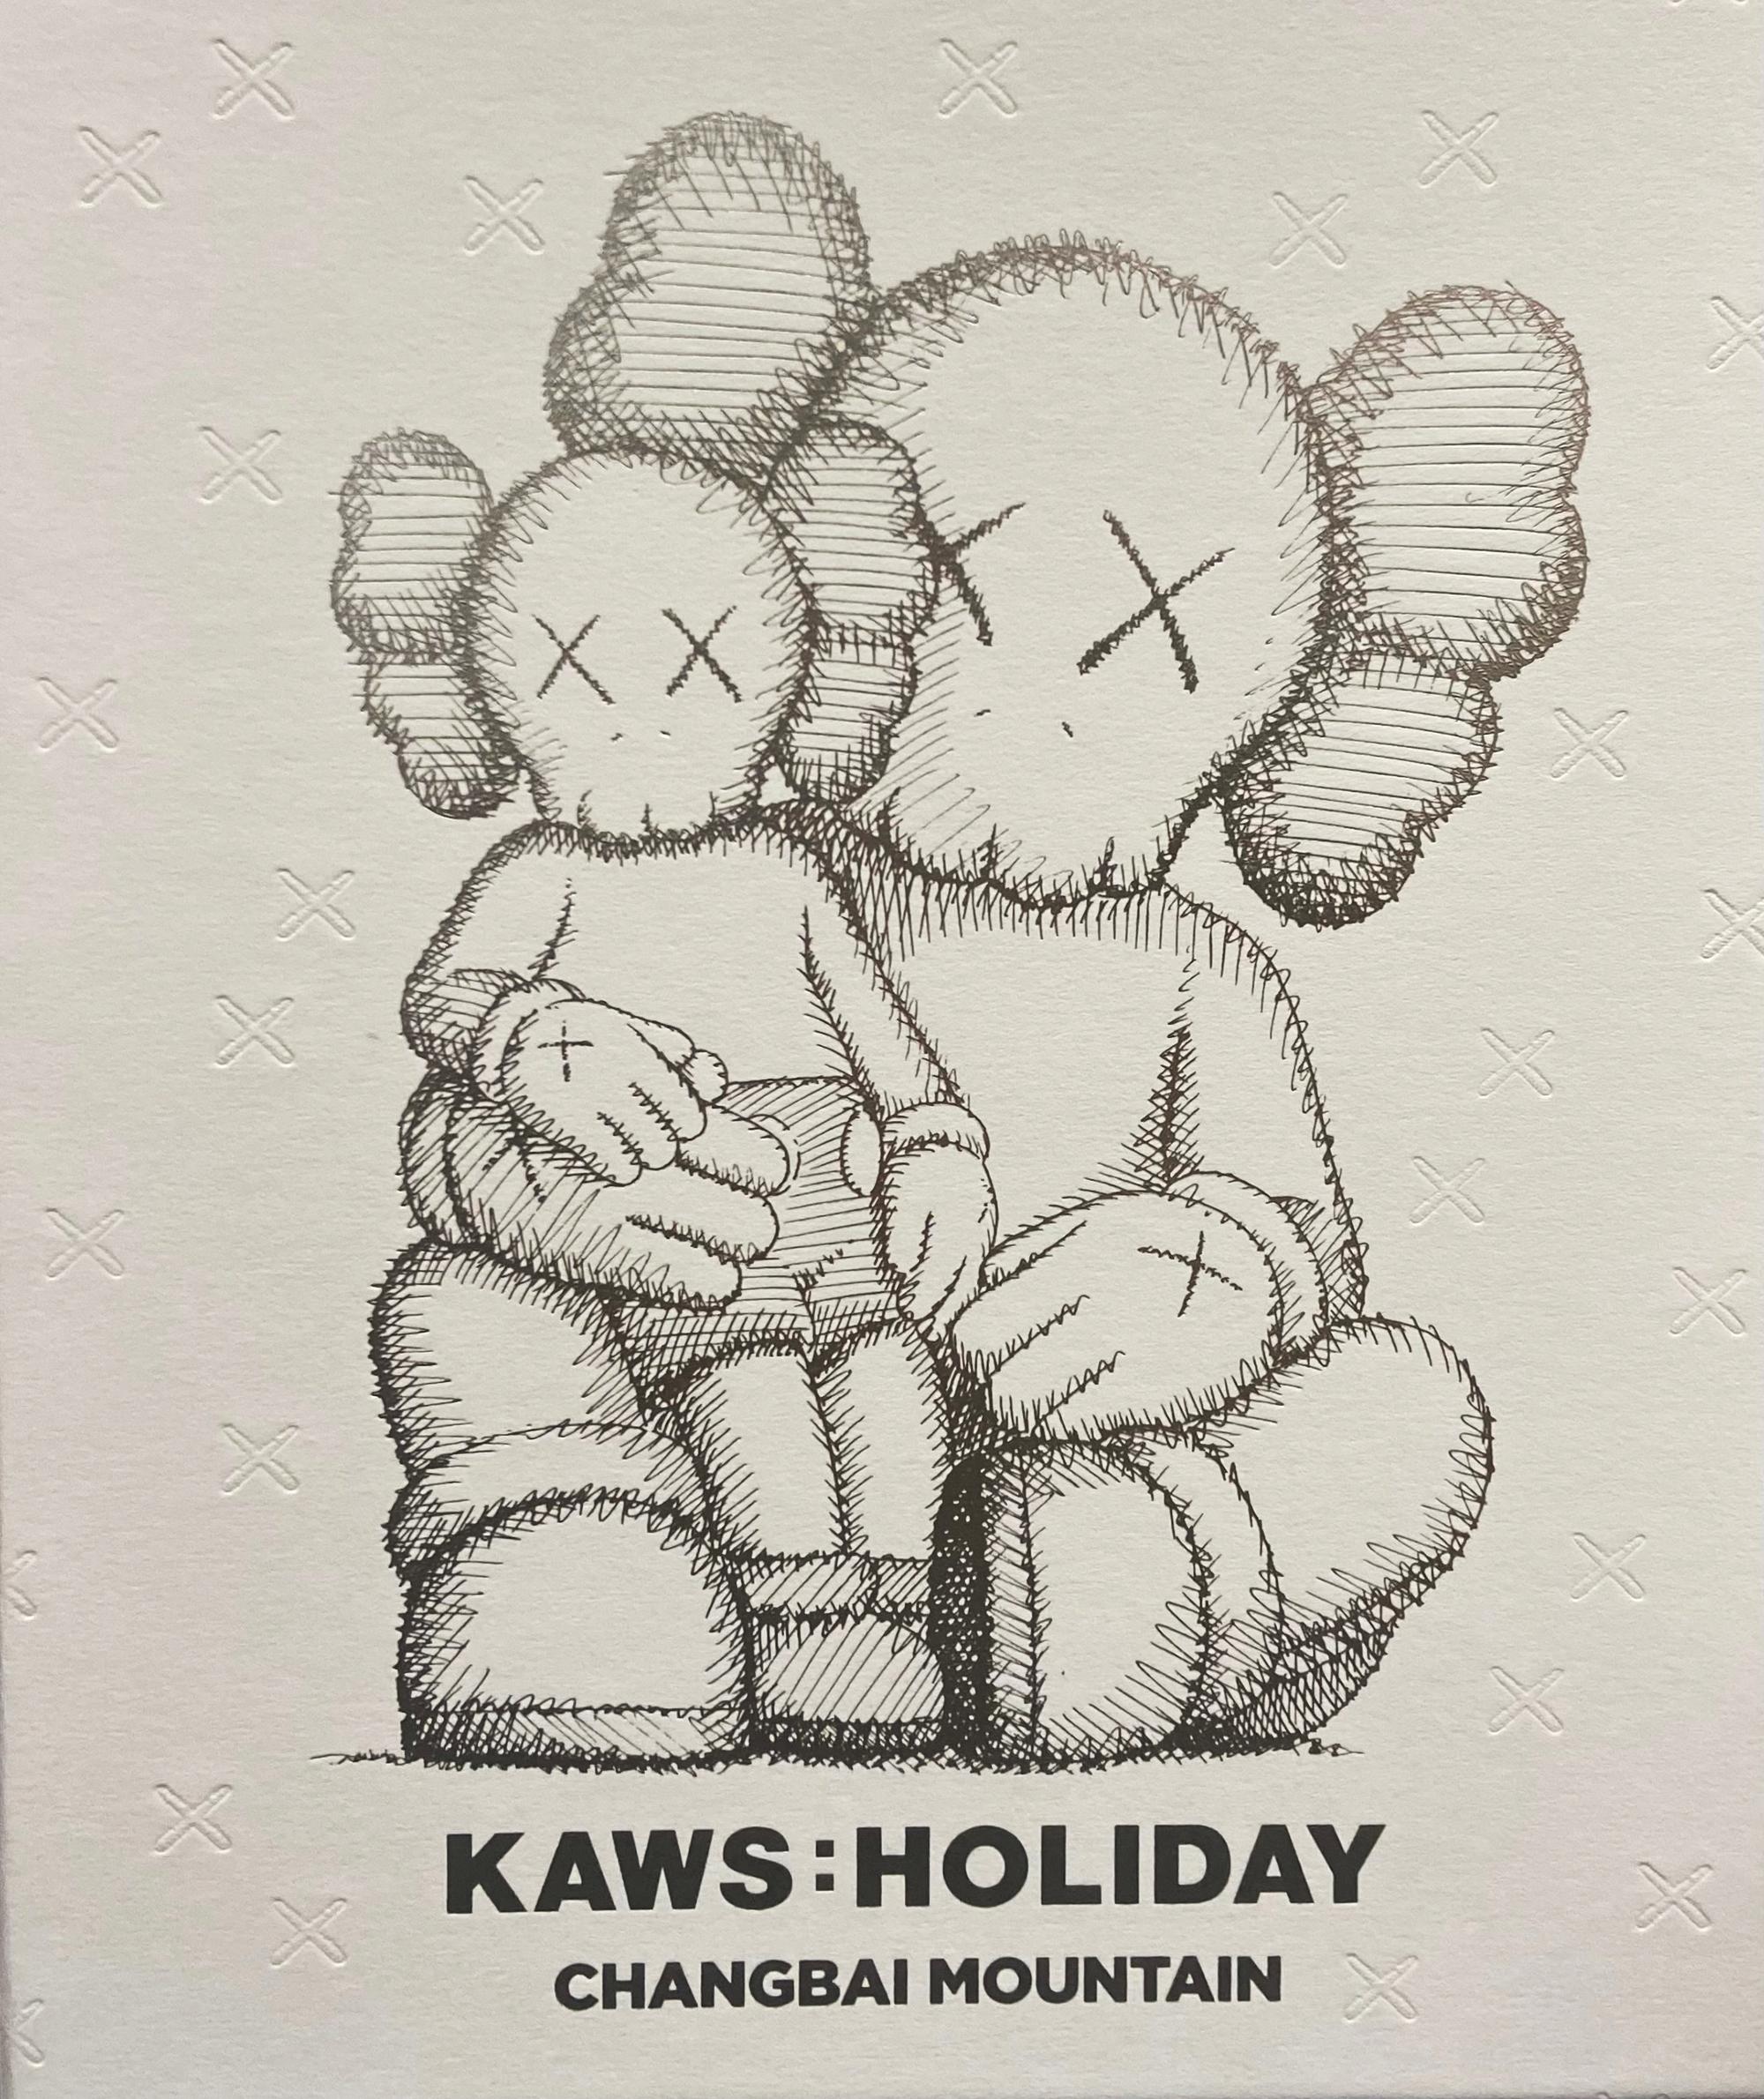 KAWS Holiday Changbai Mountain (KAWS brown Changbai):
A beautifully composed KAWS COMPANION published to commemorate KAWS' larger-scale sculpture of same, at Changbai Mountain in Jilin Province, China. The piece features the signature KAWS Companion